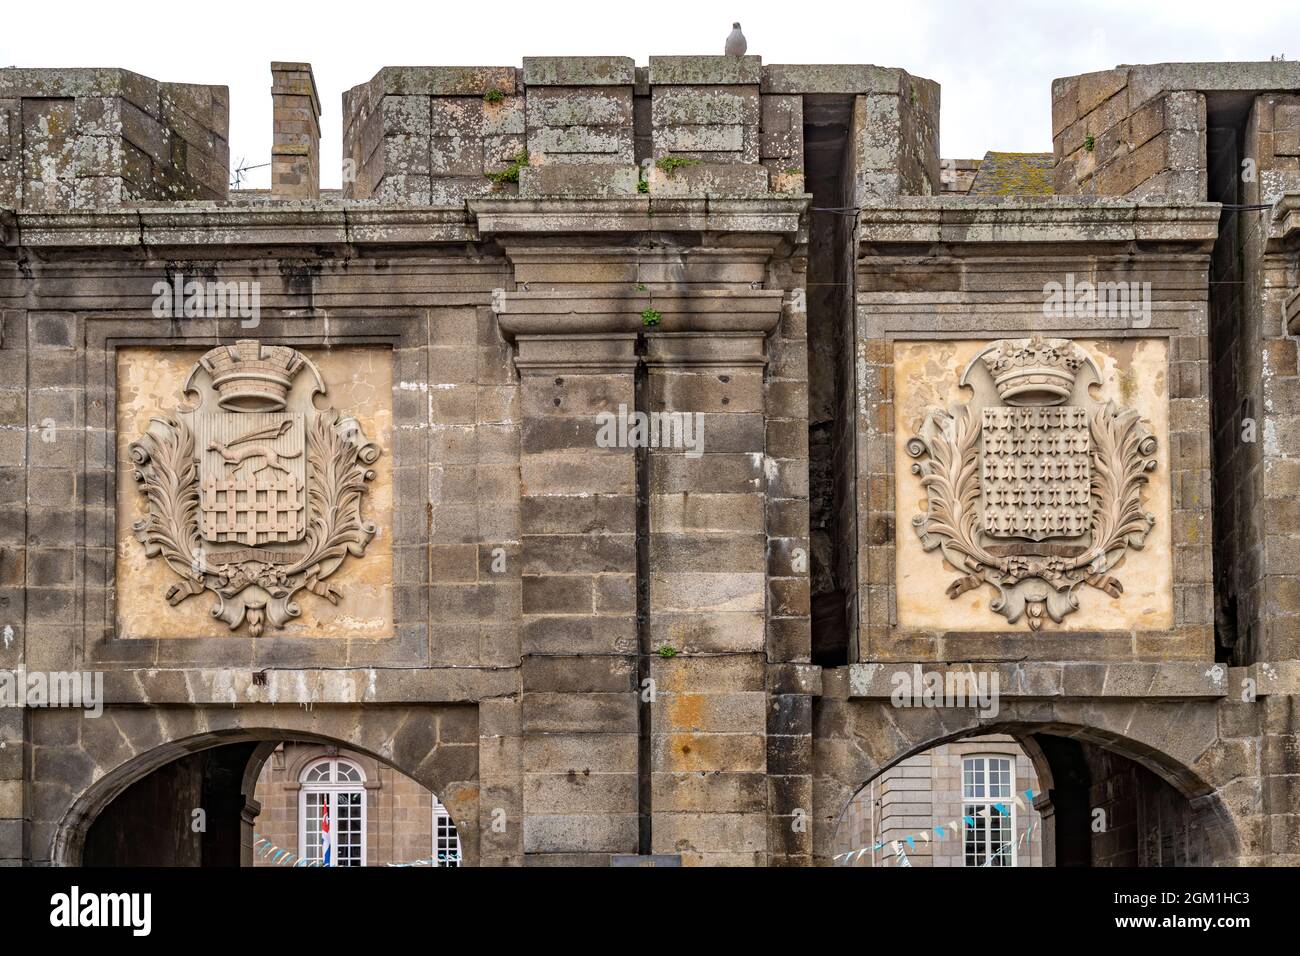 Wappen am Stadttor Porte Saint-Vincent, Saint Malo, Bretagne, Frankreich |  The walled city and beach in Saint Malo, Brittany, France Stock Photo -  Alamy